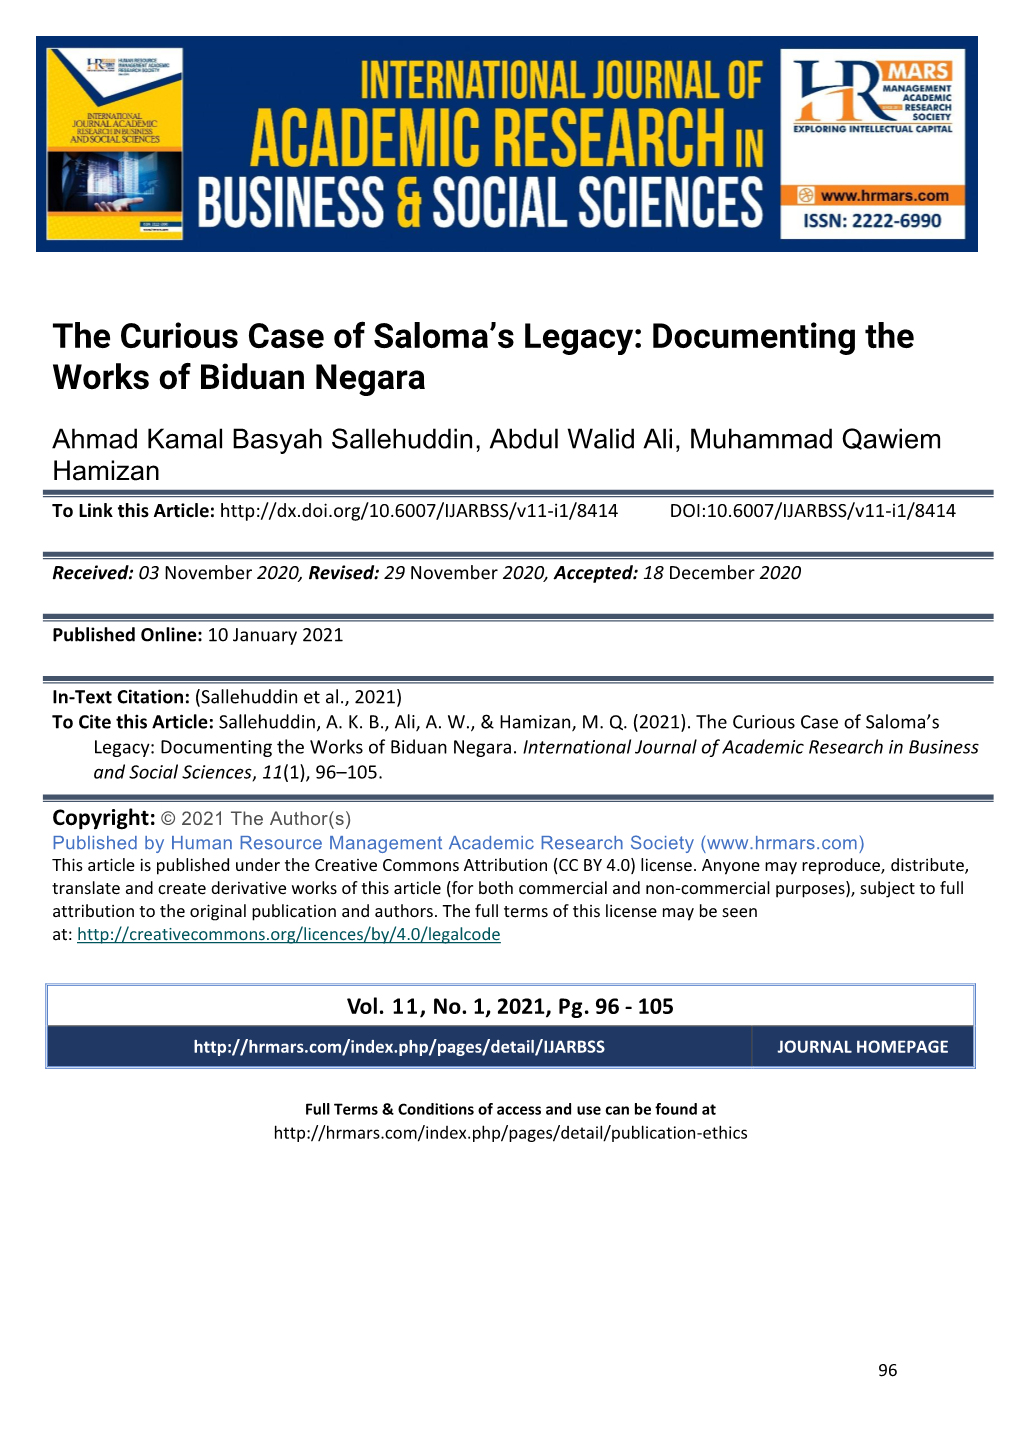 The Curious Case of Saloma's Legacy: Documenting the Works of Biduan